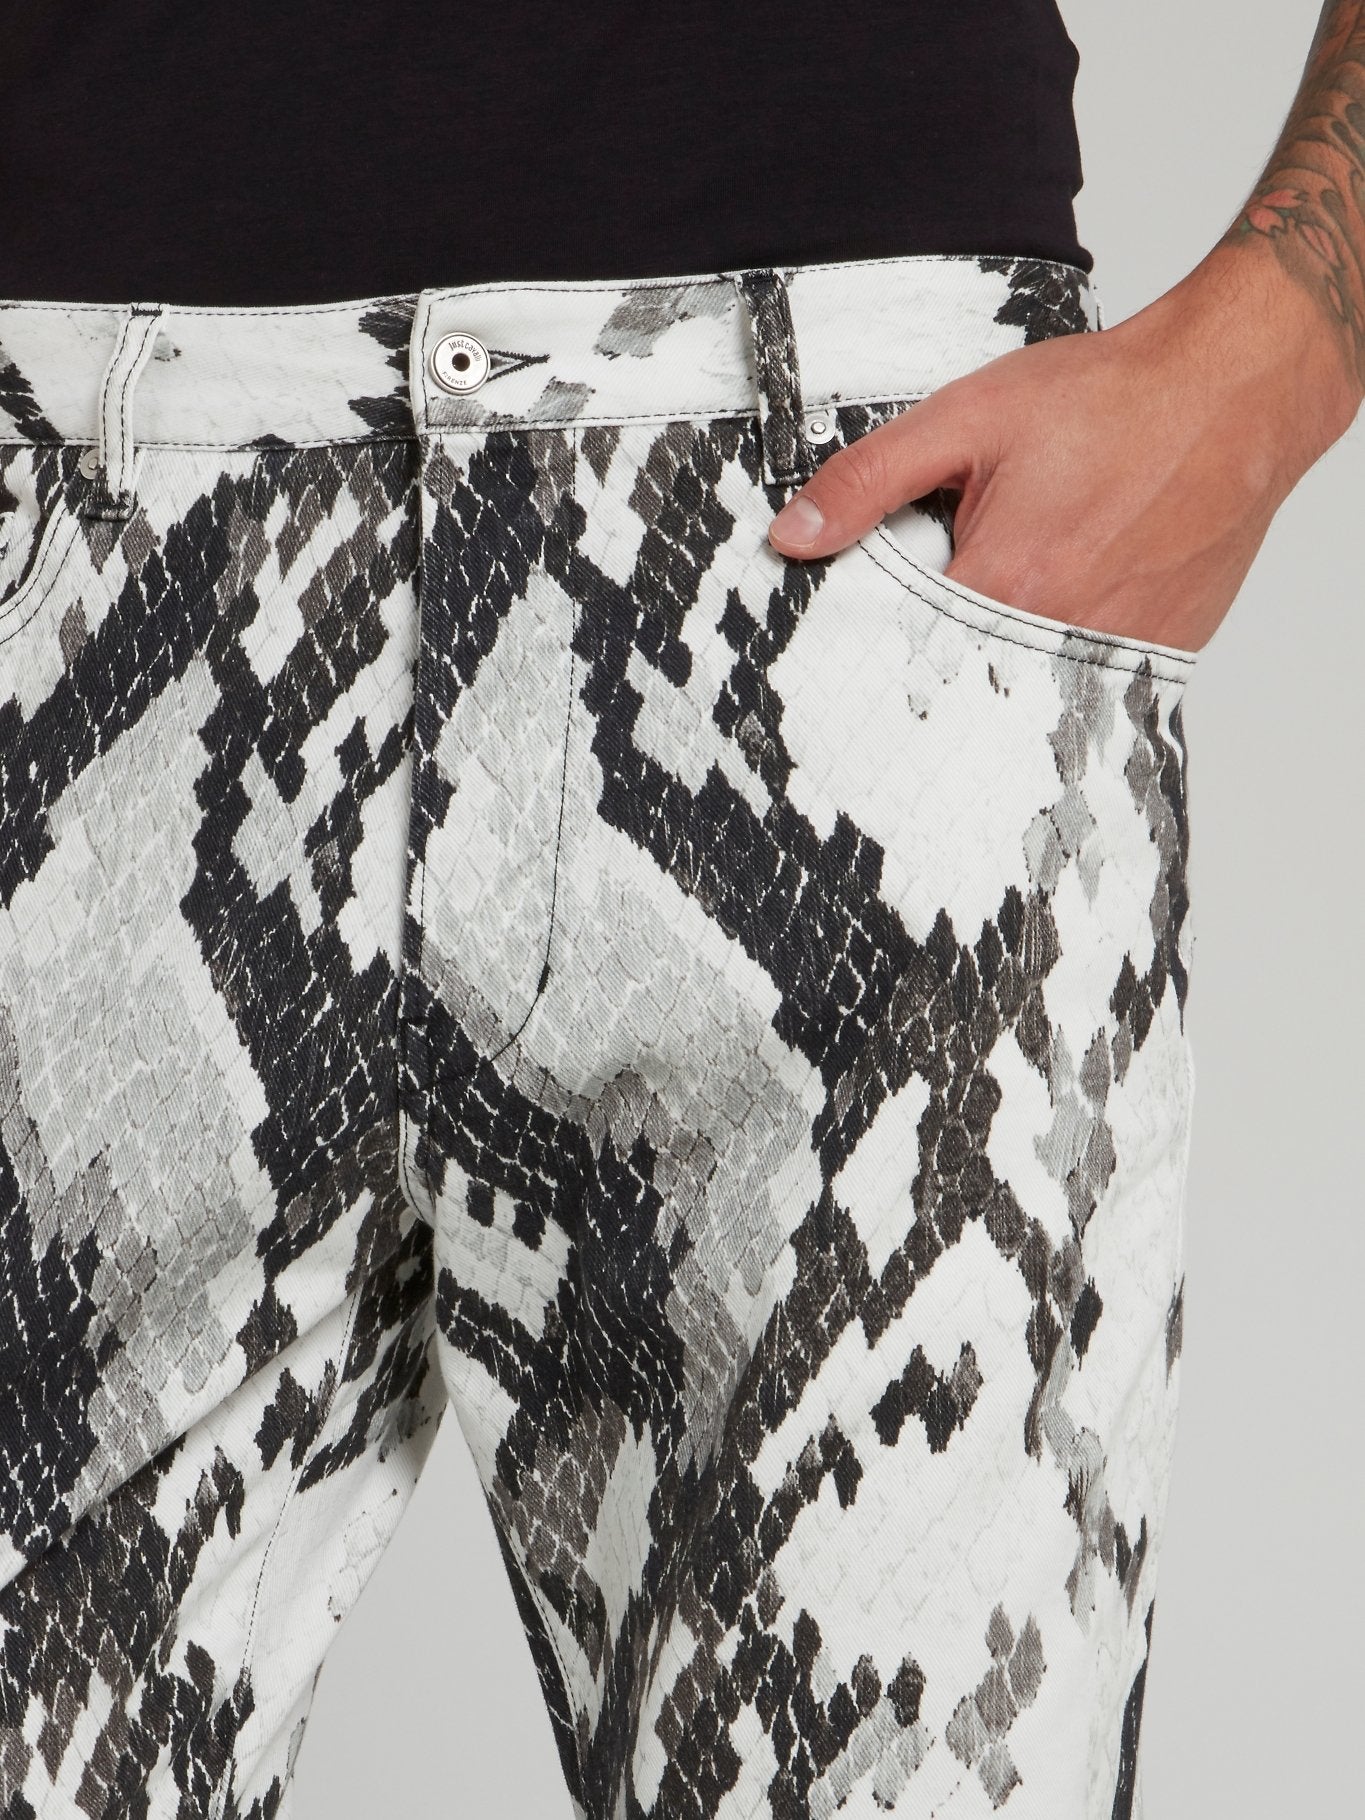 Snake Effect Slim Fit Trousers